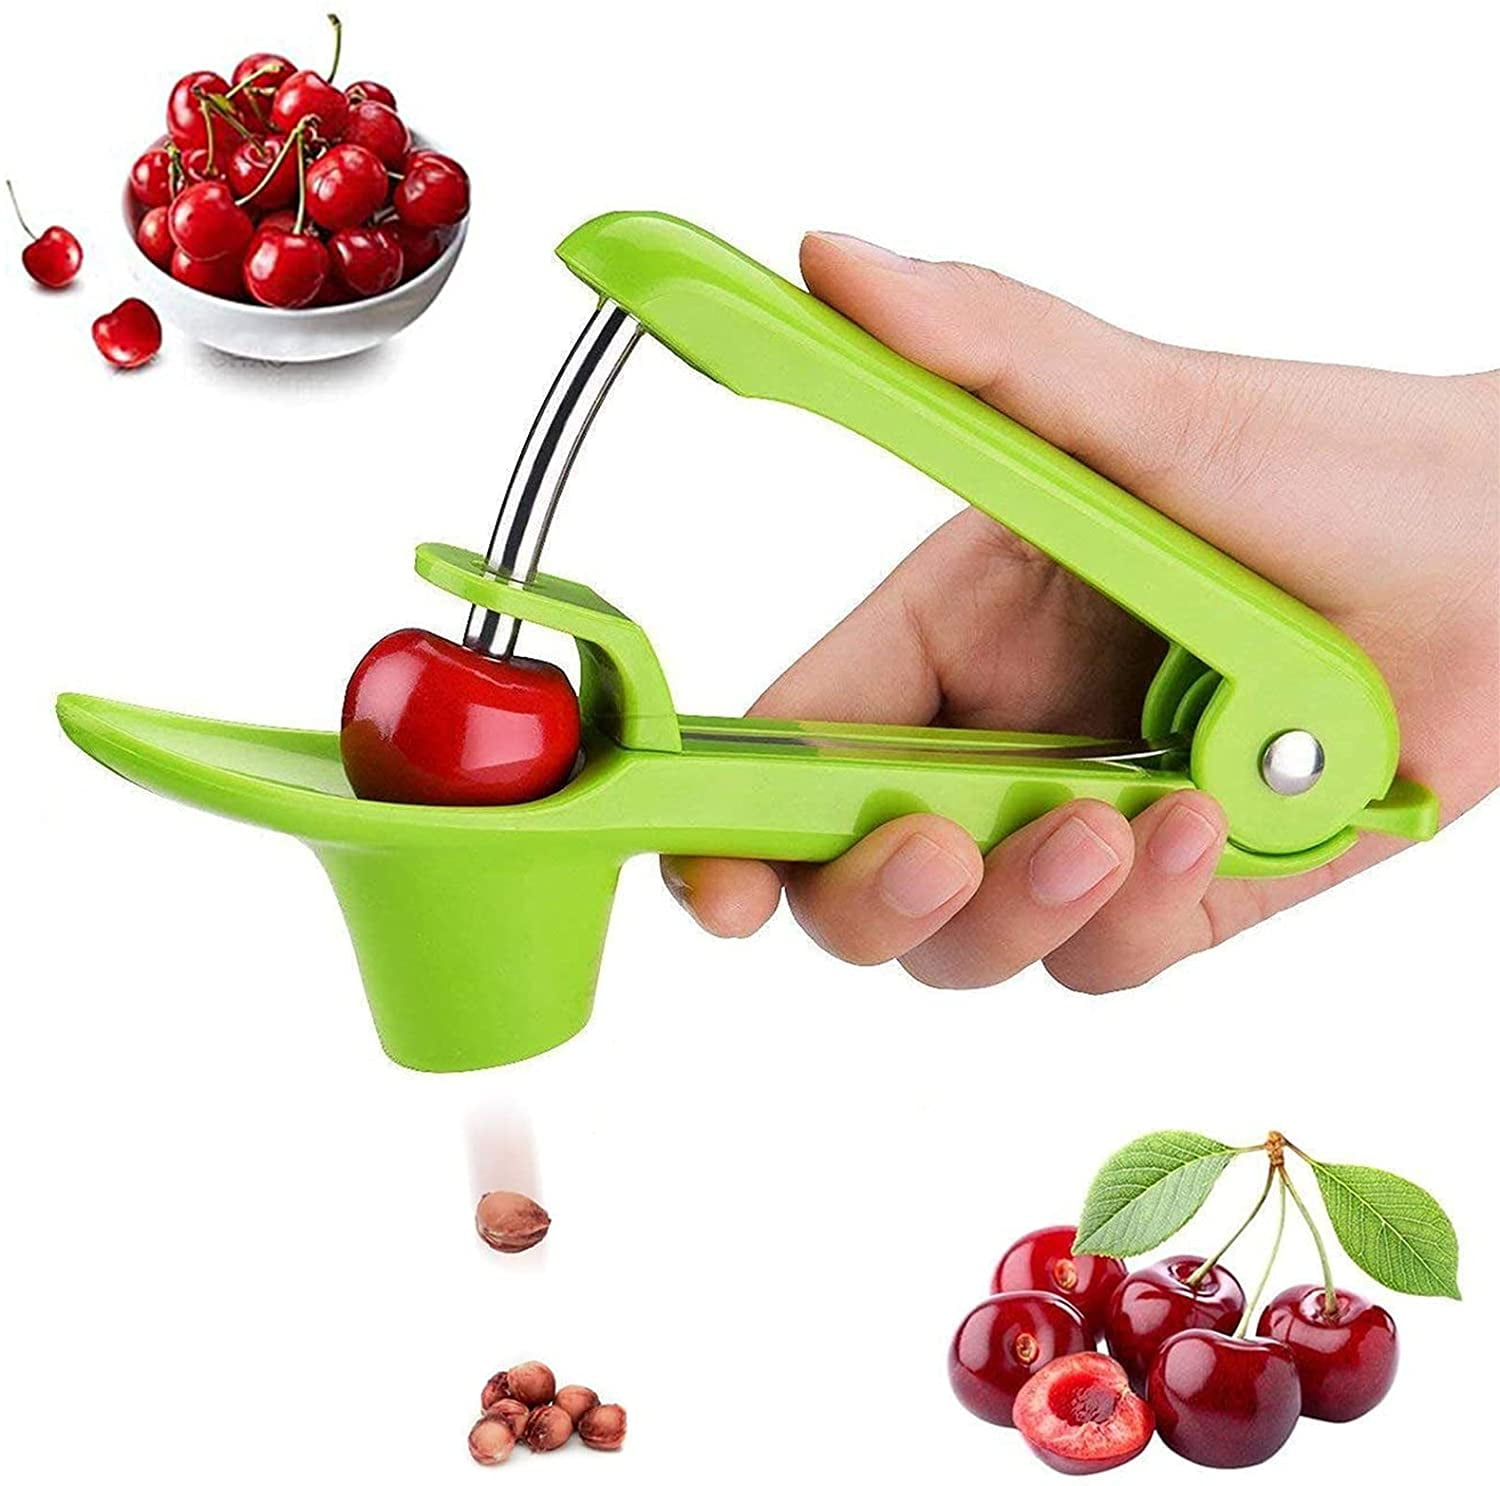 Pit Remover for Cherries Olive Pit Remover Heavy-Duty Cherry Seed Remover Cherry Pit Remover Tool Stainless Steel / Durable Cherry Pitter Tool Cherry Corer Pitter Tool for Cherries Jam 